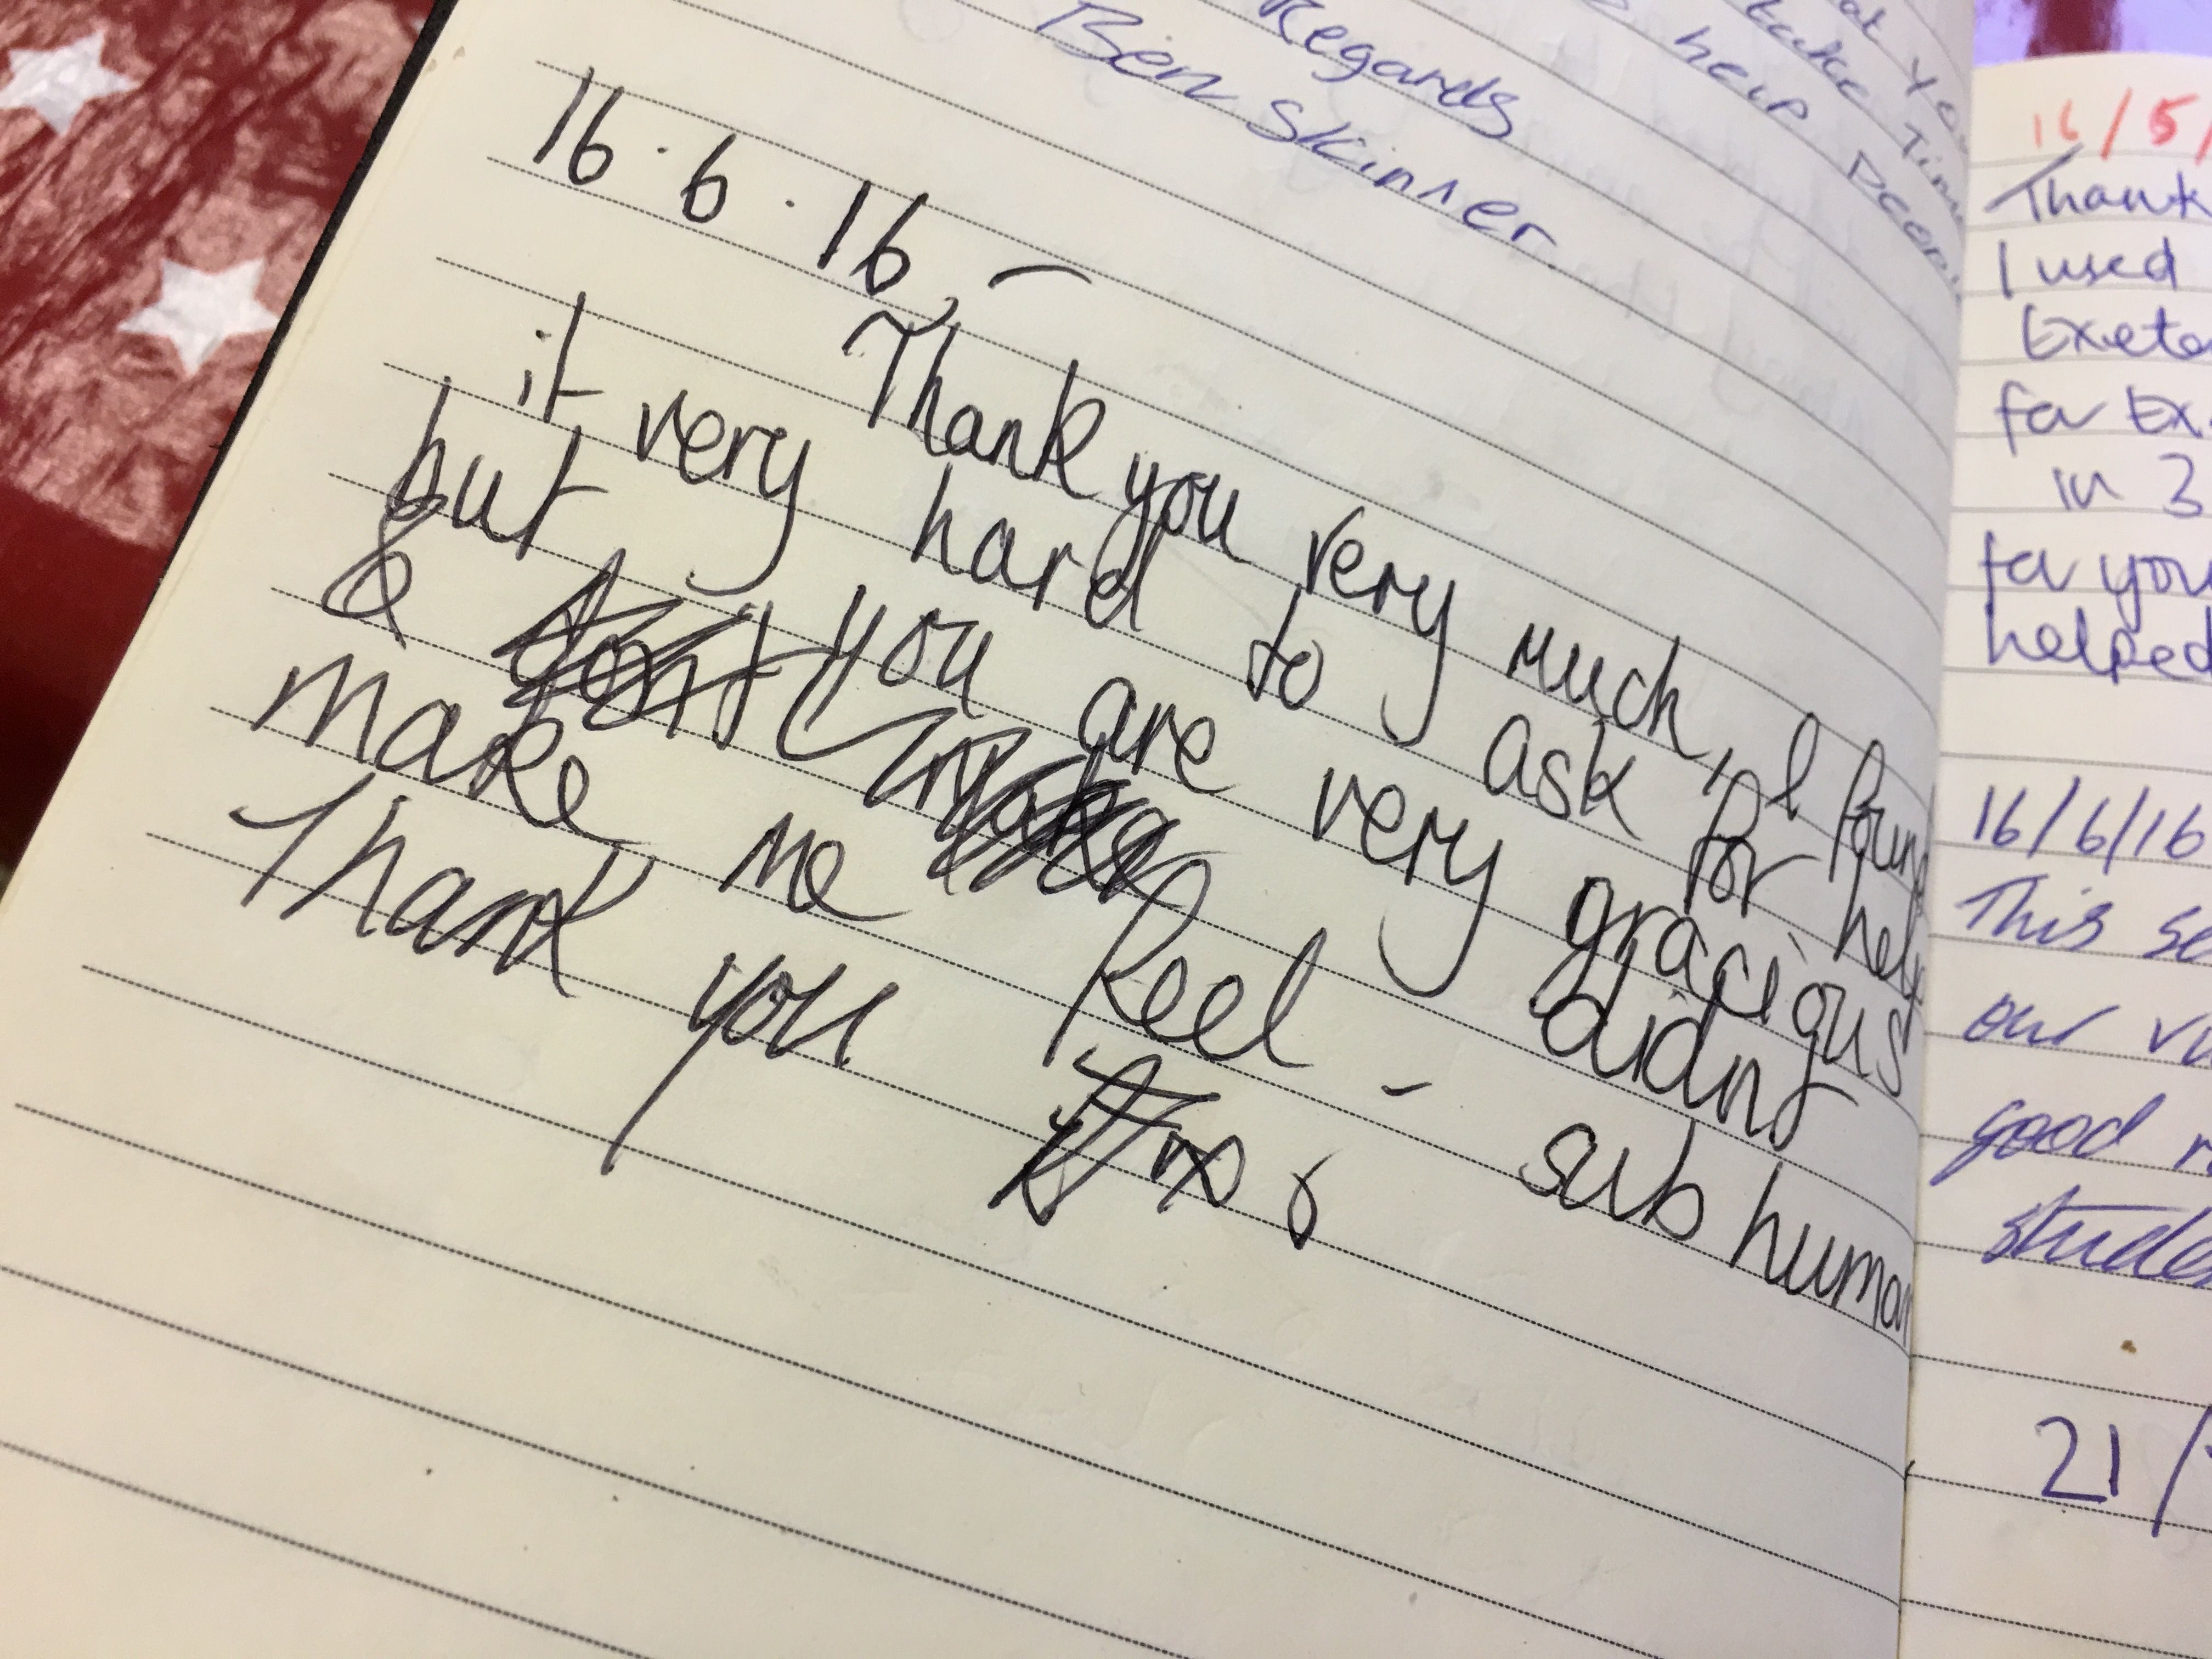 One of the entries in the Food Bank's guest book. Image by Caitlin Bawn. England, 2016.